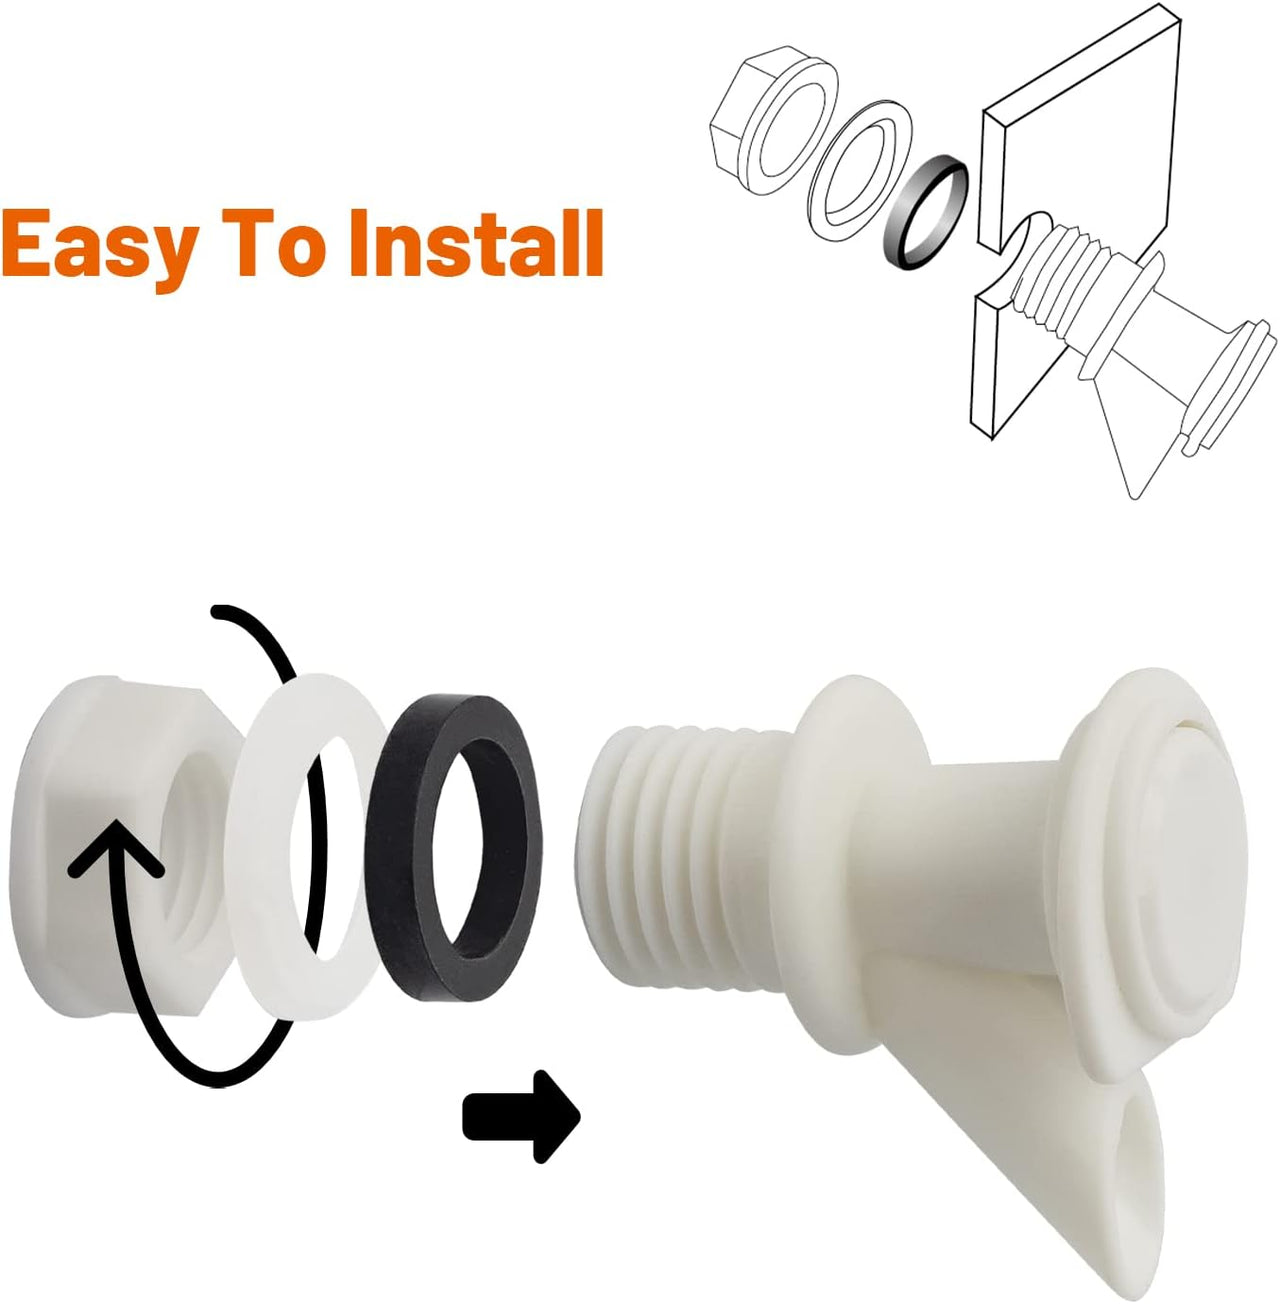 Push-Button Spigot Cooler Spigot Replacement. Compatible with Igloo 2-10 Gallon Water Coolers. Durable Beverage Jugs Spigot (3 Pack)